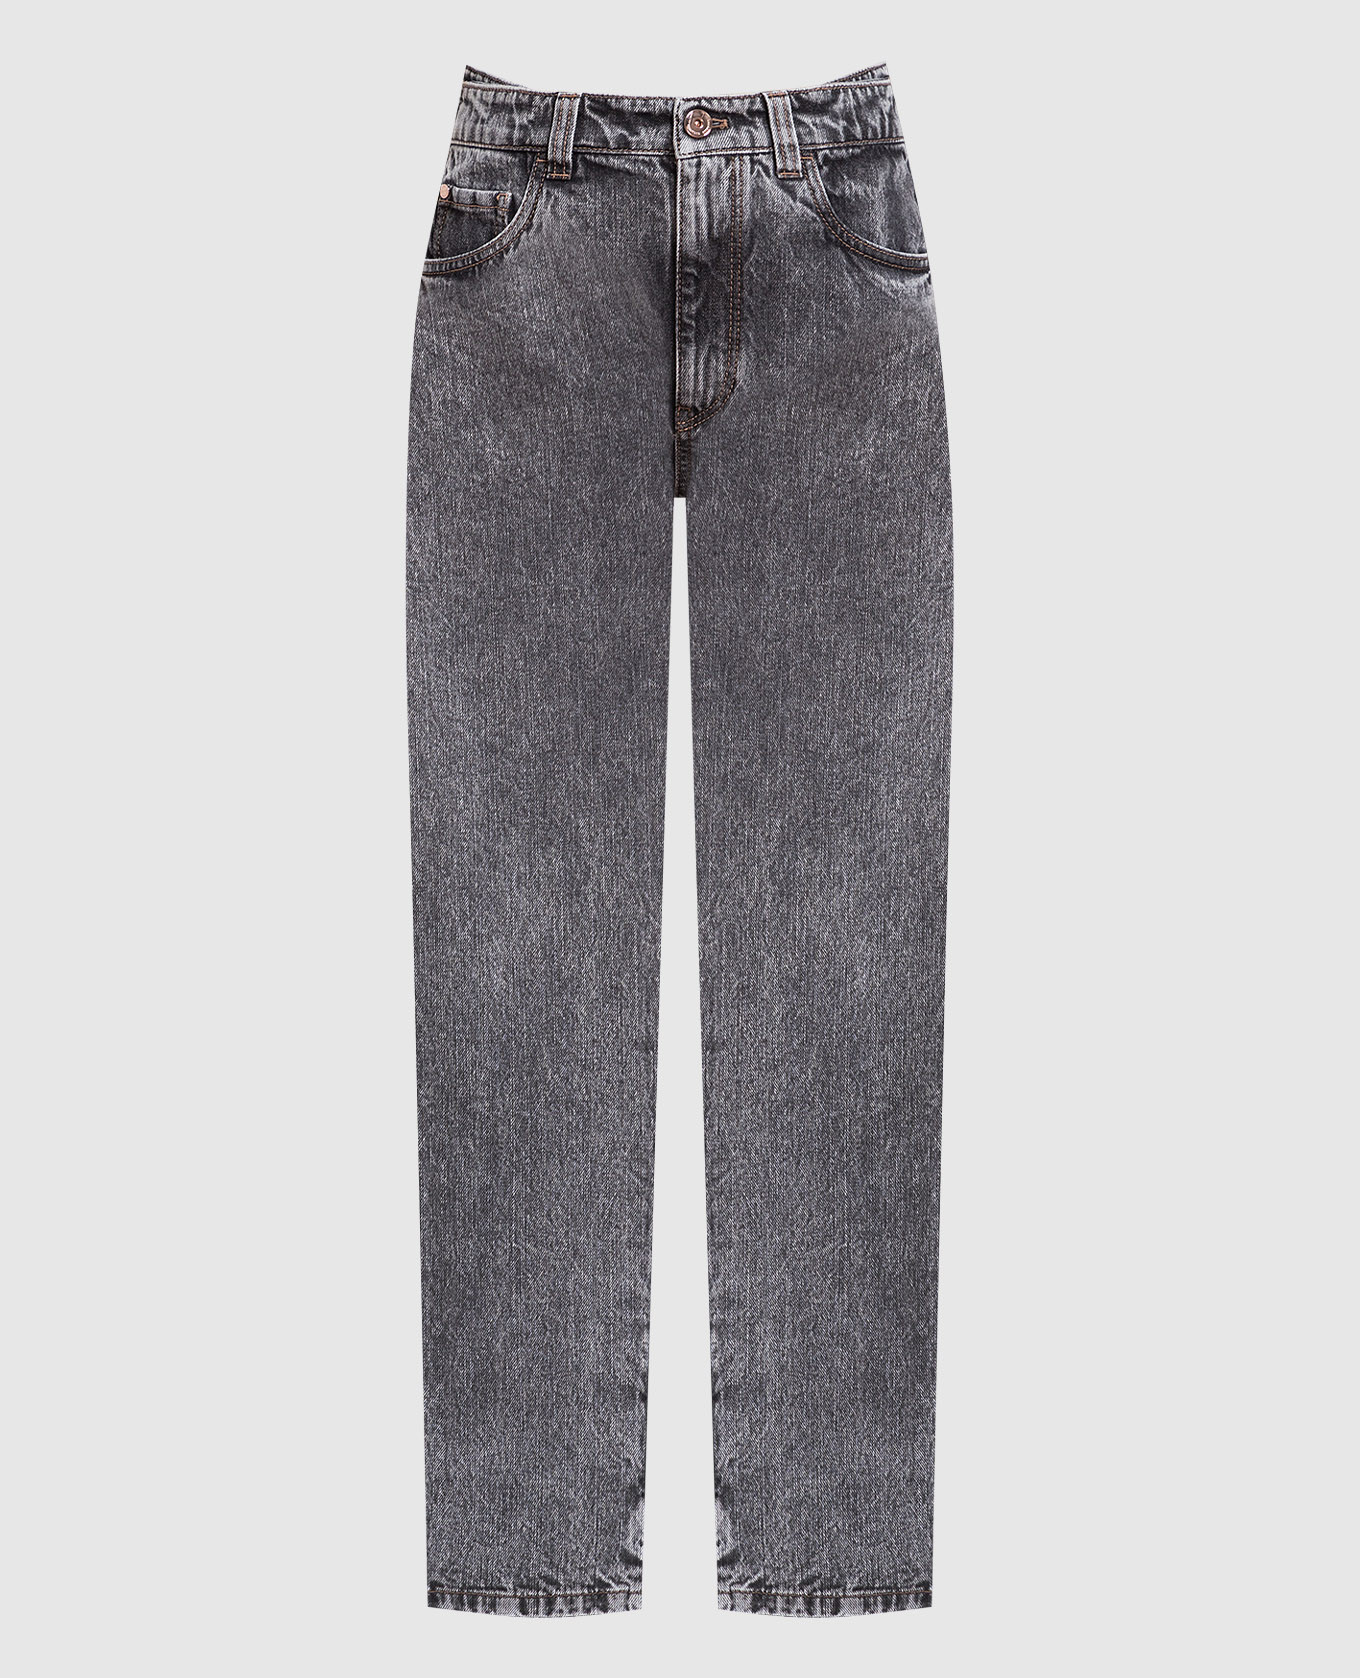 Gray jeans with monil chain